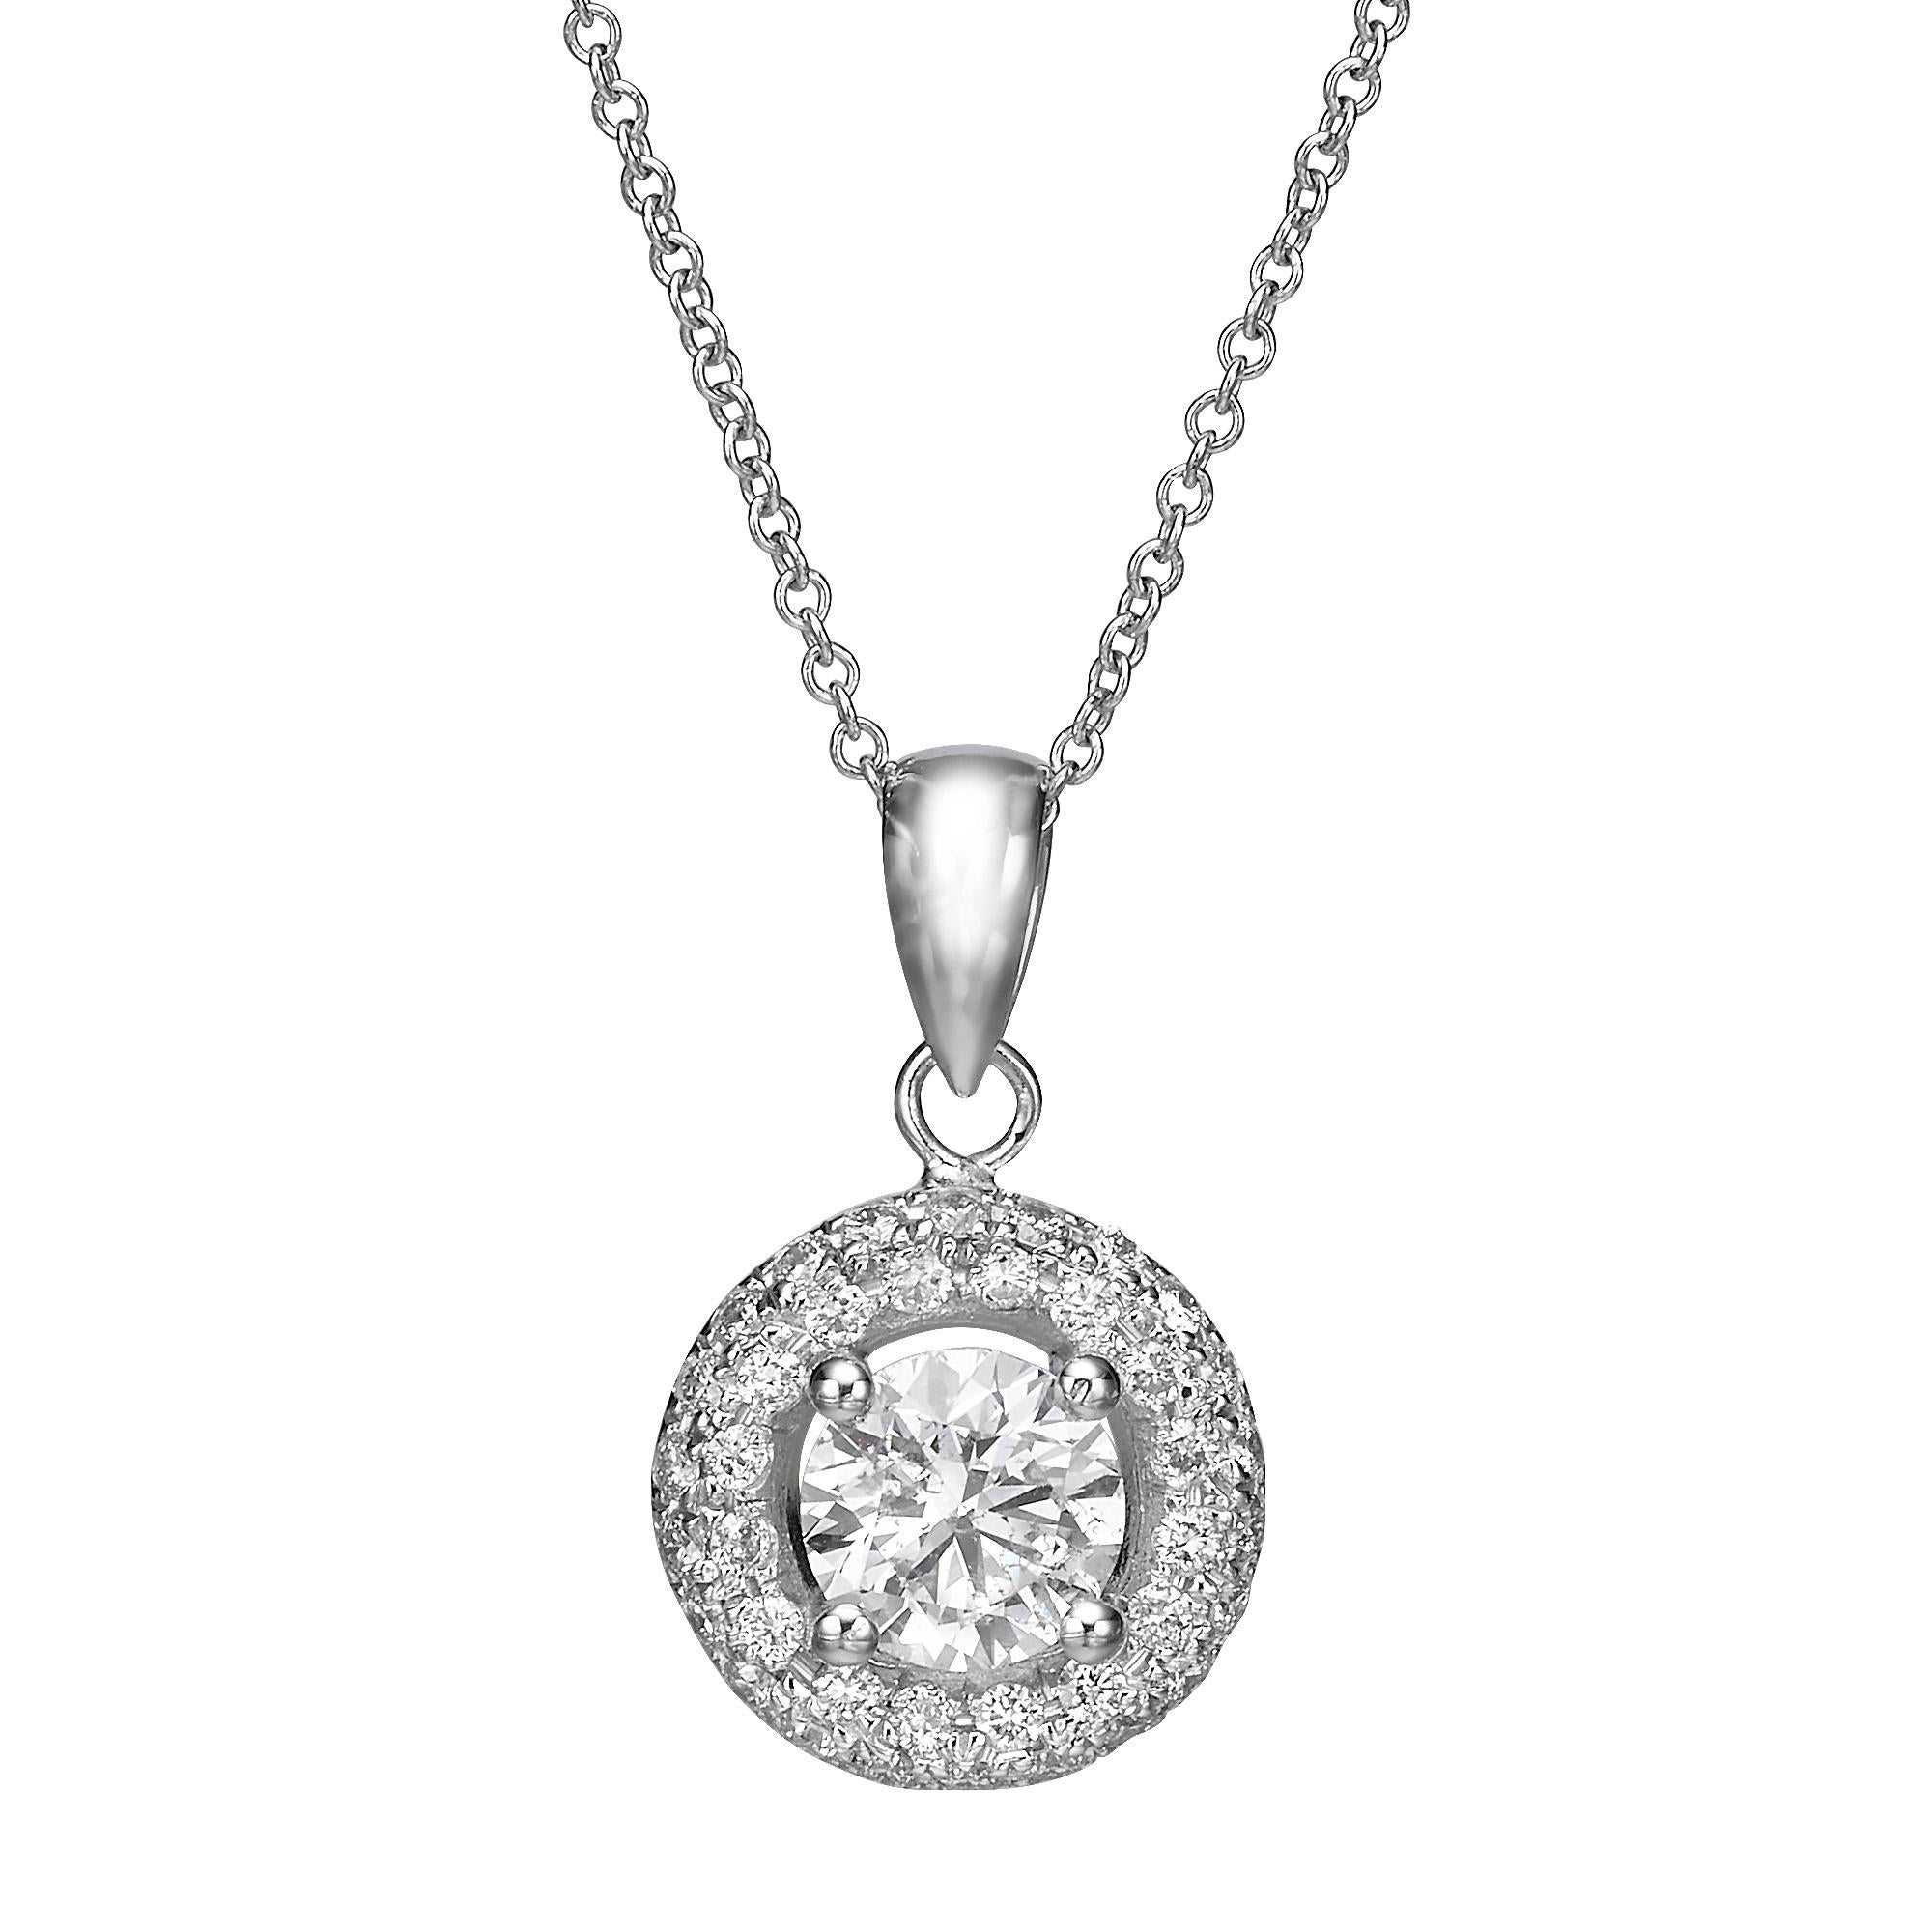 Lot# 4056843
An elegant halo pendant crafted from 8K white gold and features a brilliant round diamond at its center weighing 1.01 carats  H-I  SI2-I1.Surrounding the center stone is a delicate halo of small diamonds that match the center stone,